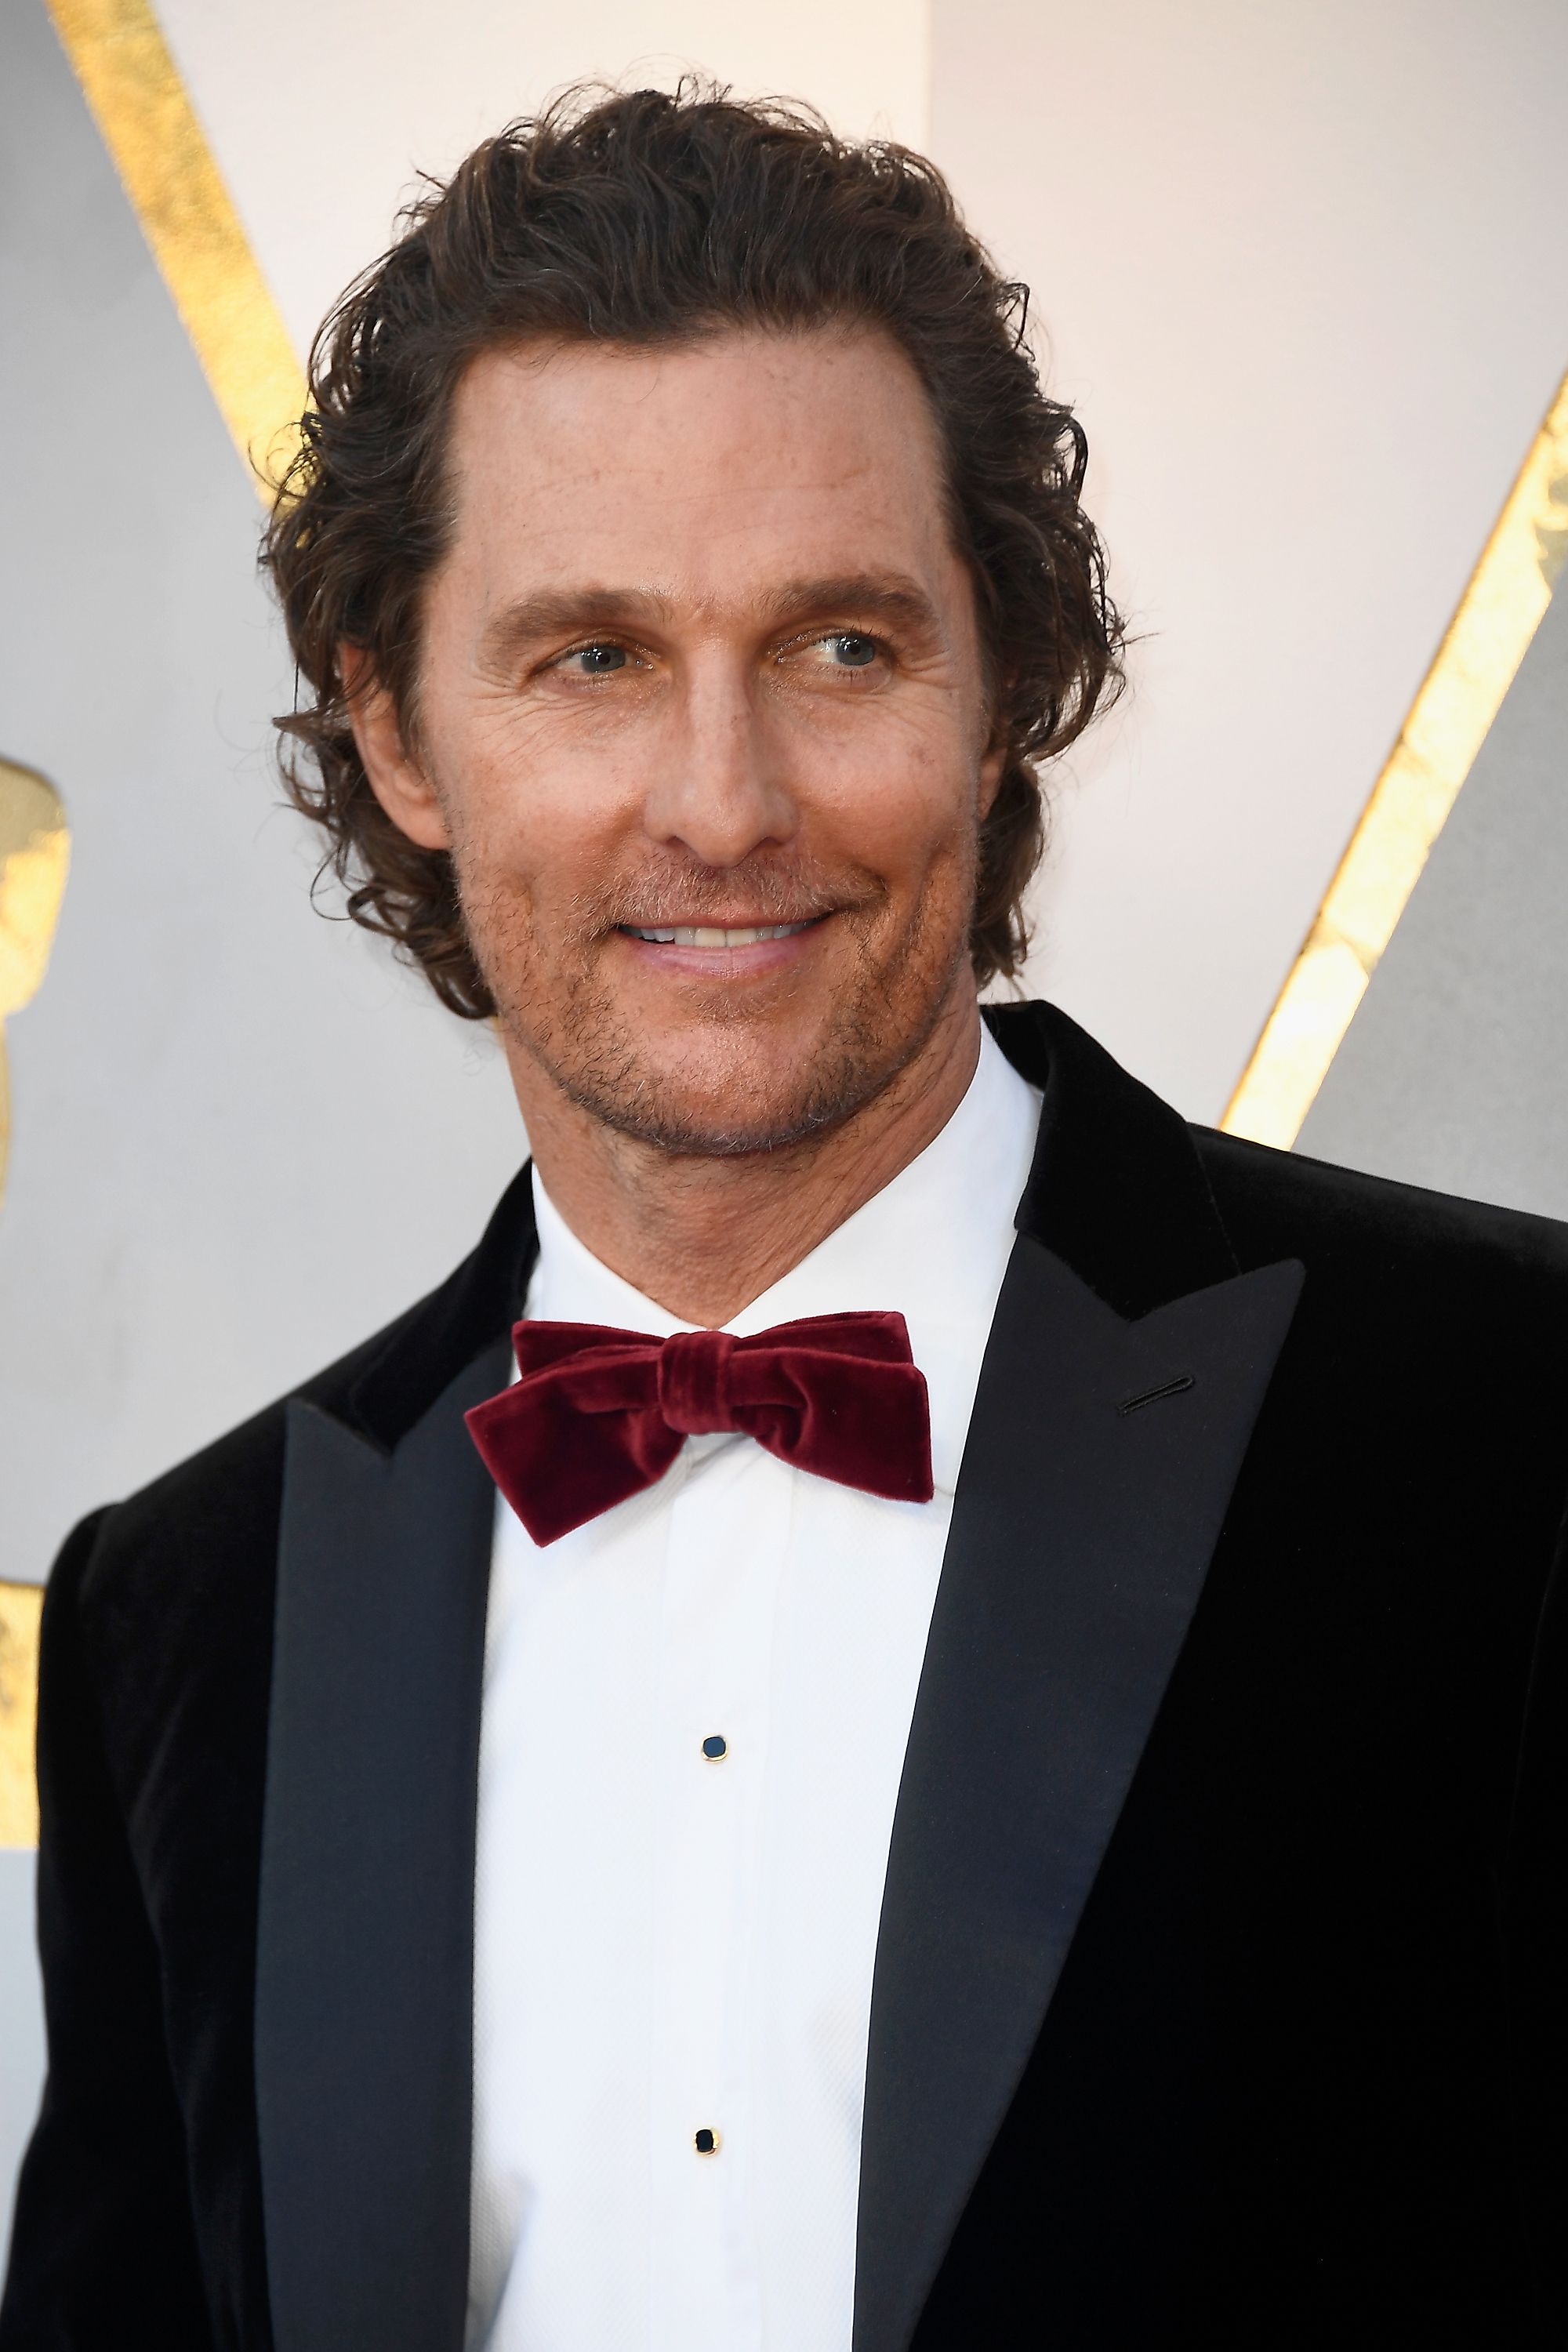 Matthew McConaughey attends the 90th Annual Academy Awards at Hollywood & Highland Center on March 4, 2018 in Hollywood, California. | Photo: Getty Images.